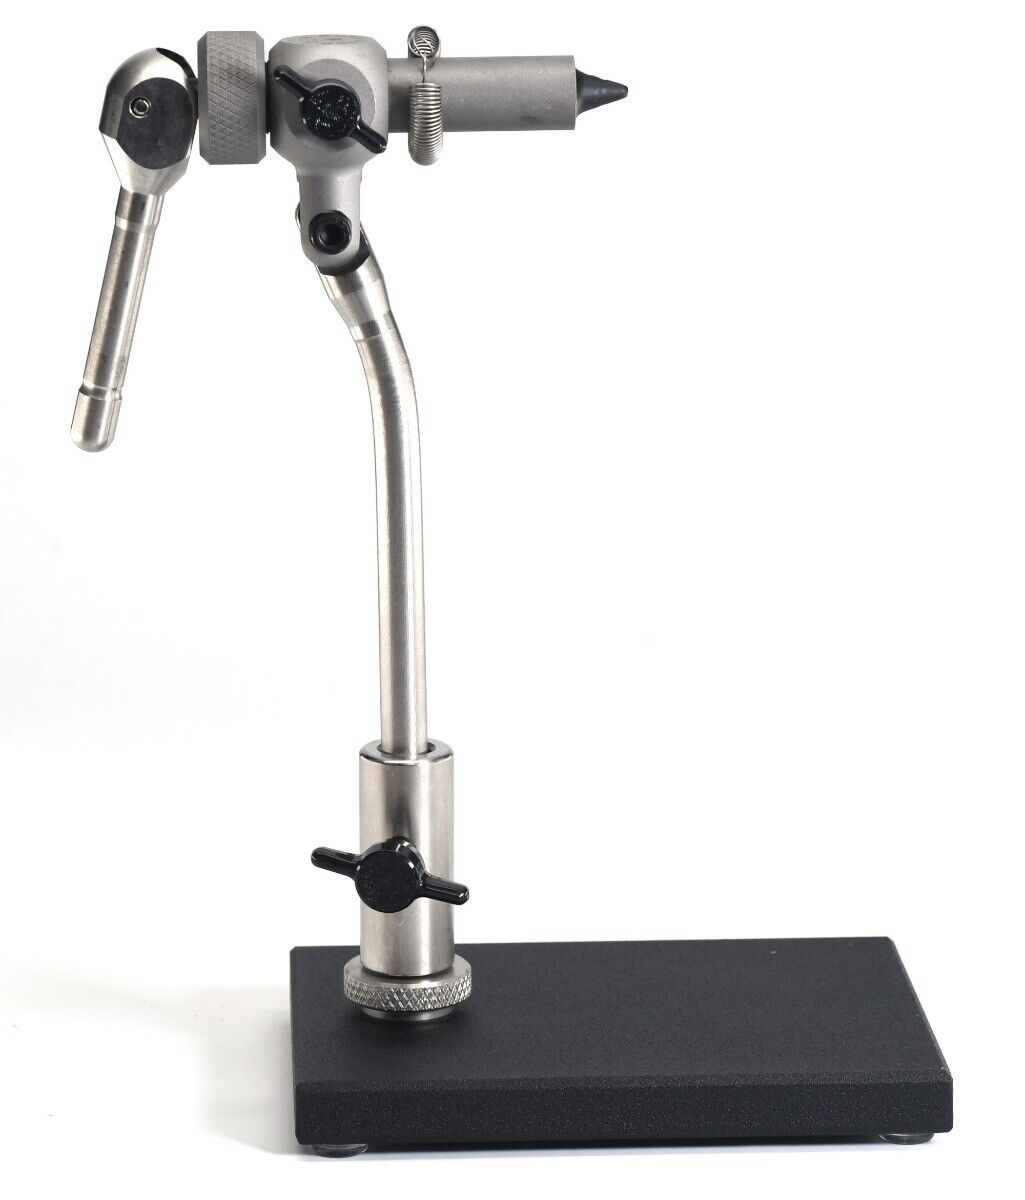 Anvil Apex Fly Tying Vice